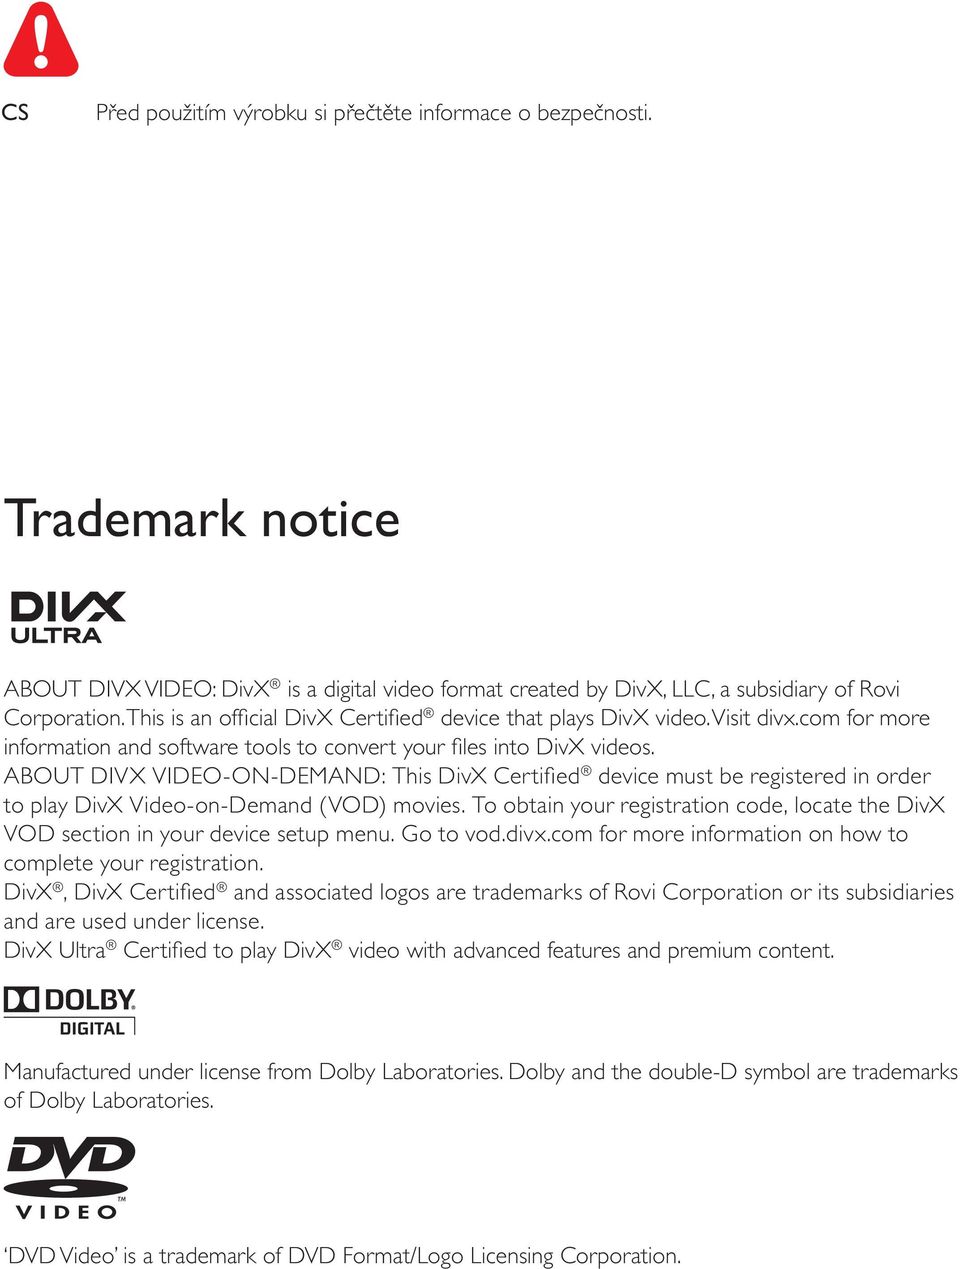 ABOUT DIVX VIDEO-ON-DEMAND: This DivX Certified device must be registered in order to play DivX Video-on-Demand (VOD) movies.